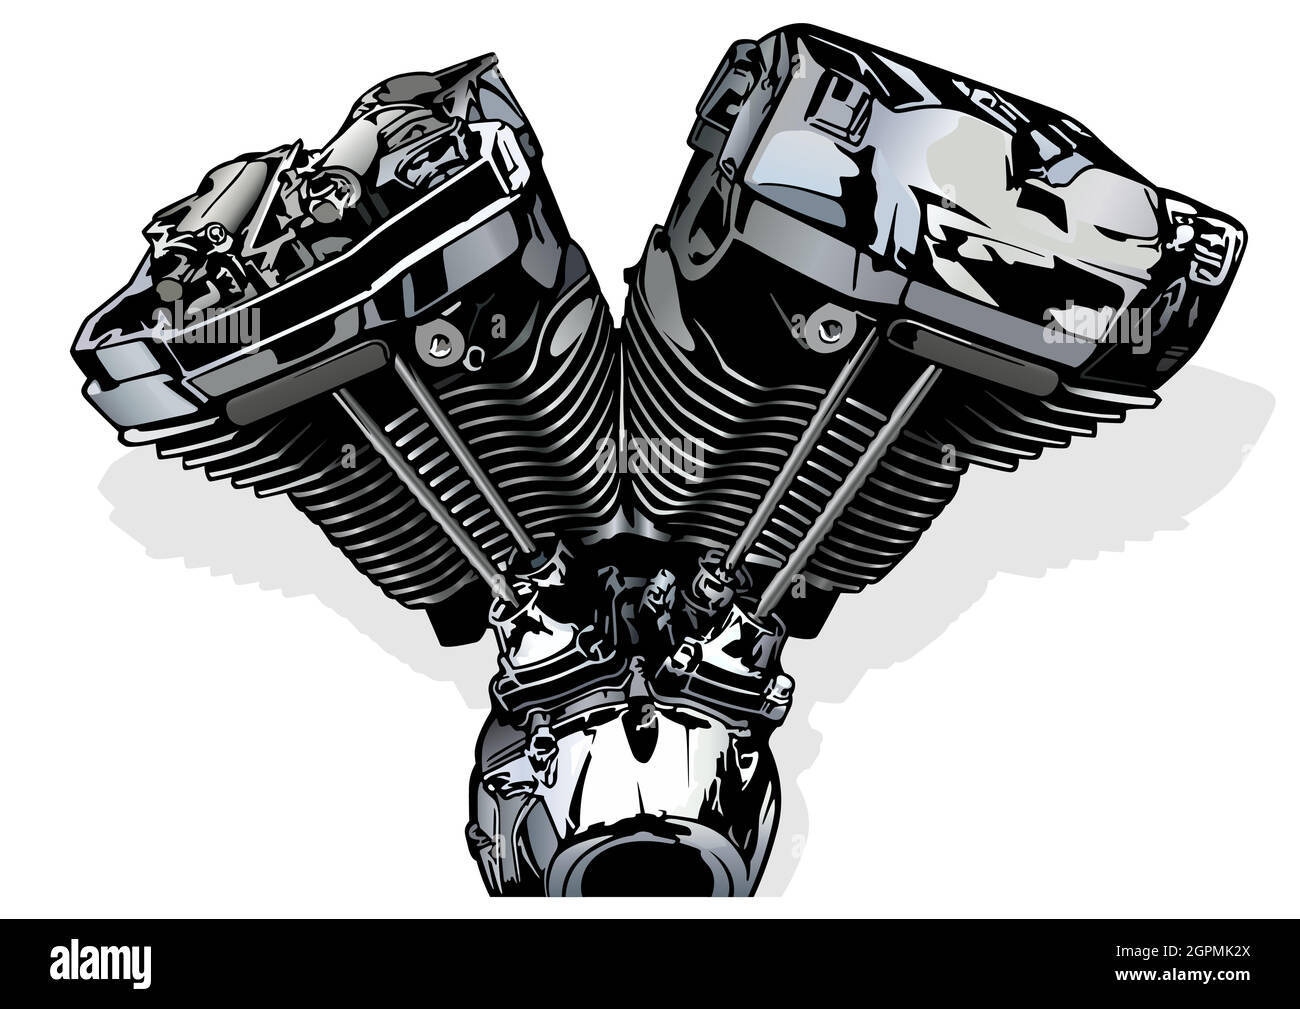 Colored Illustration of a Motorcycle Engine Stock Vector